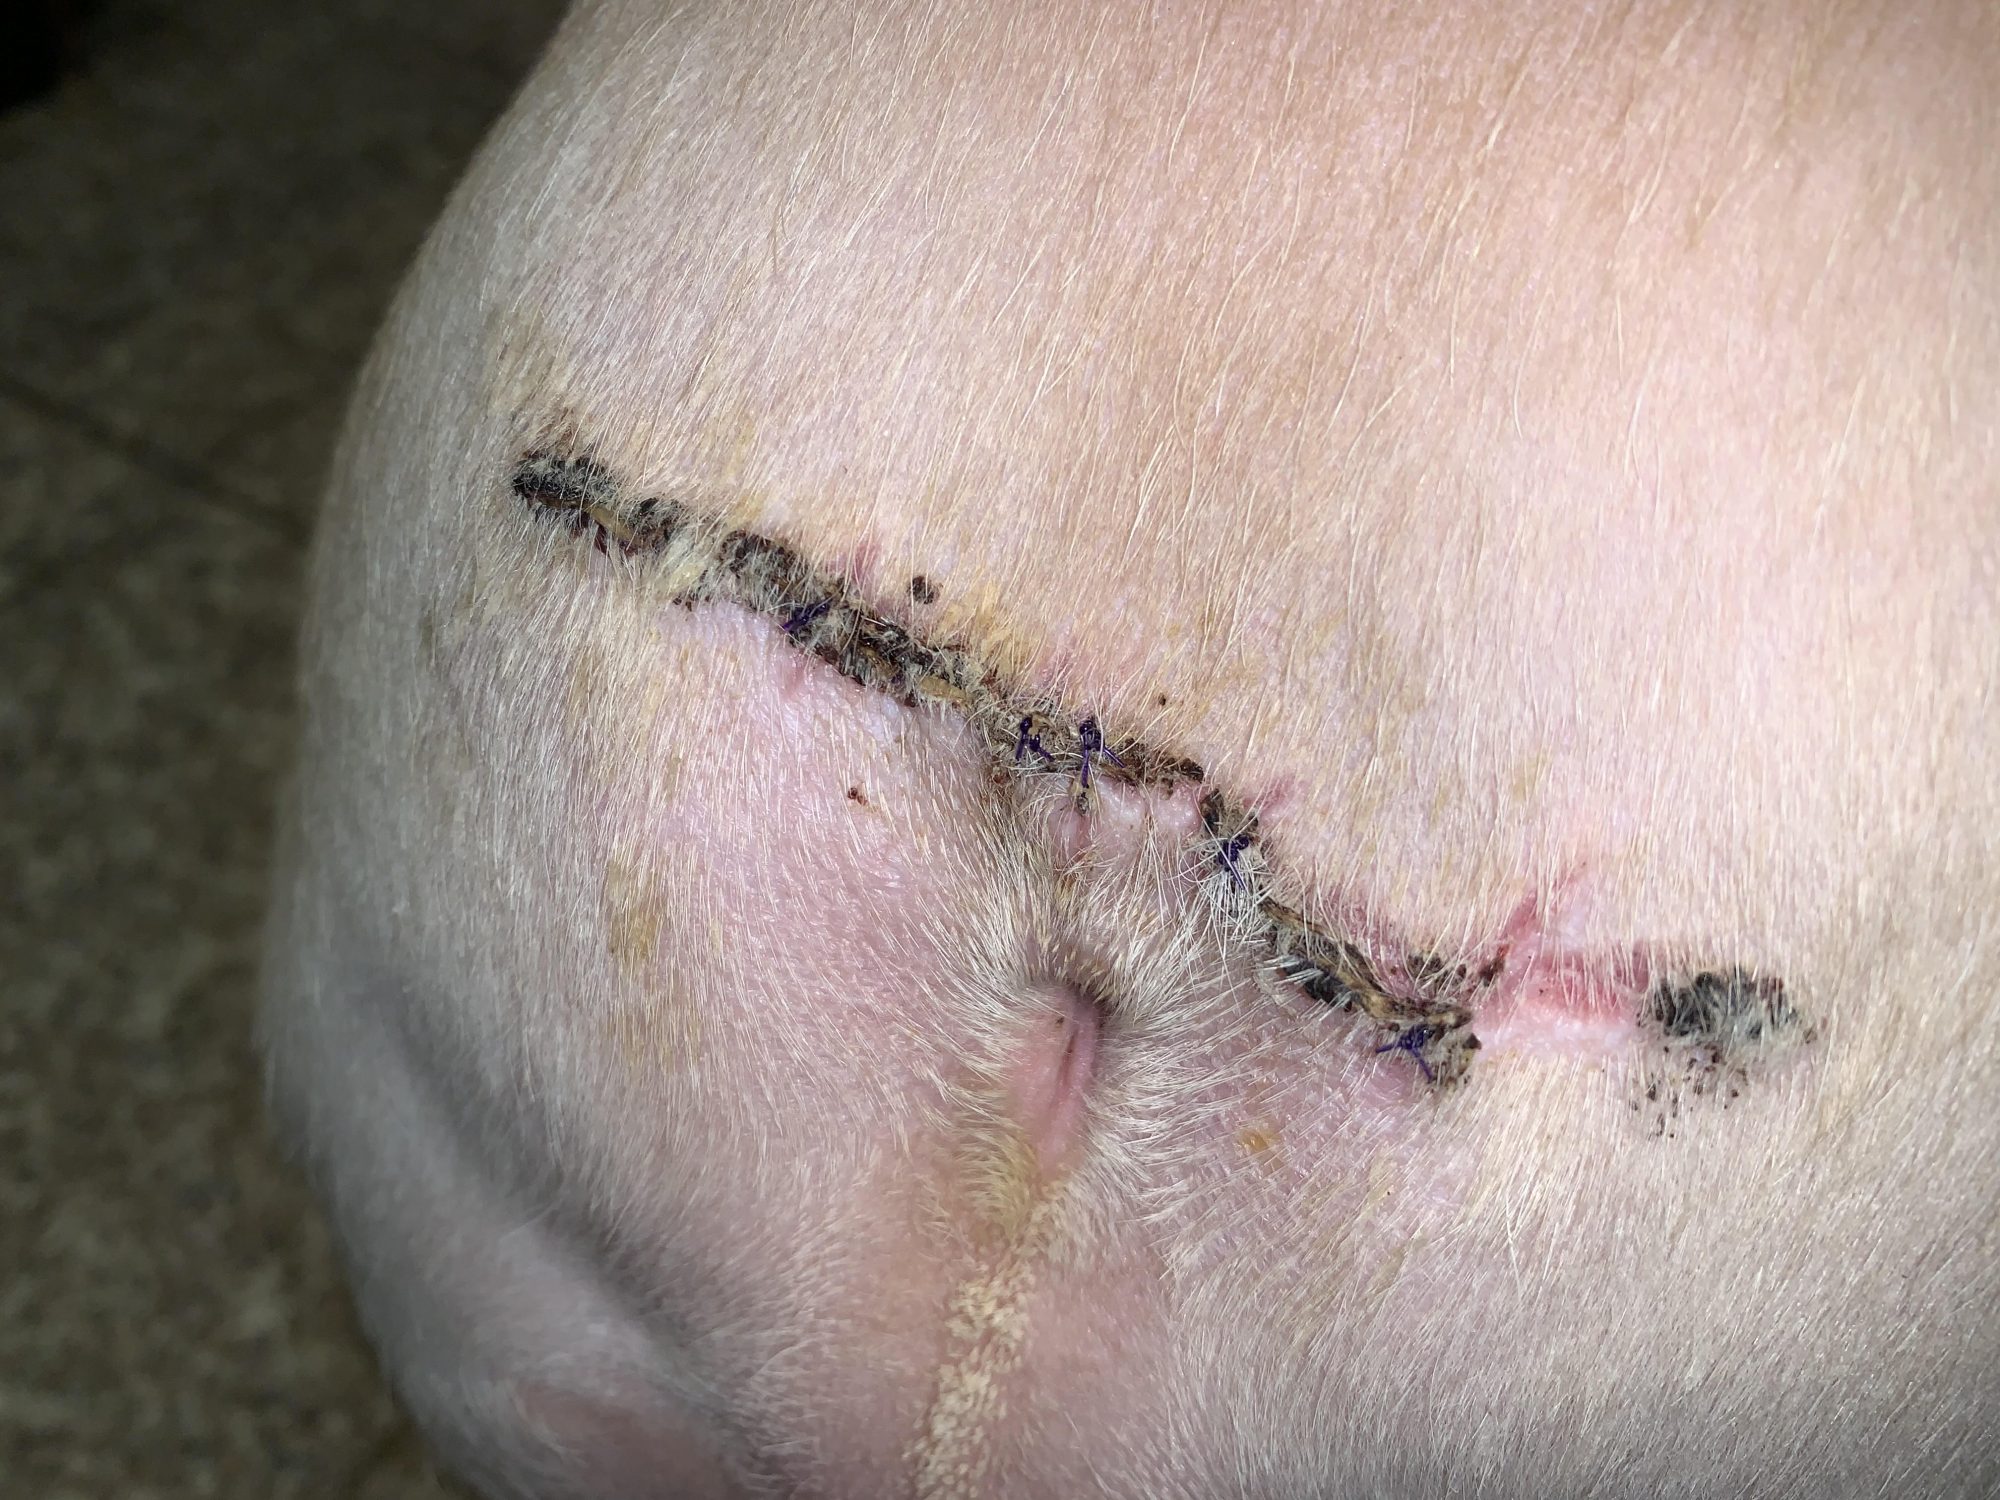 A healing incision